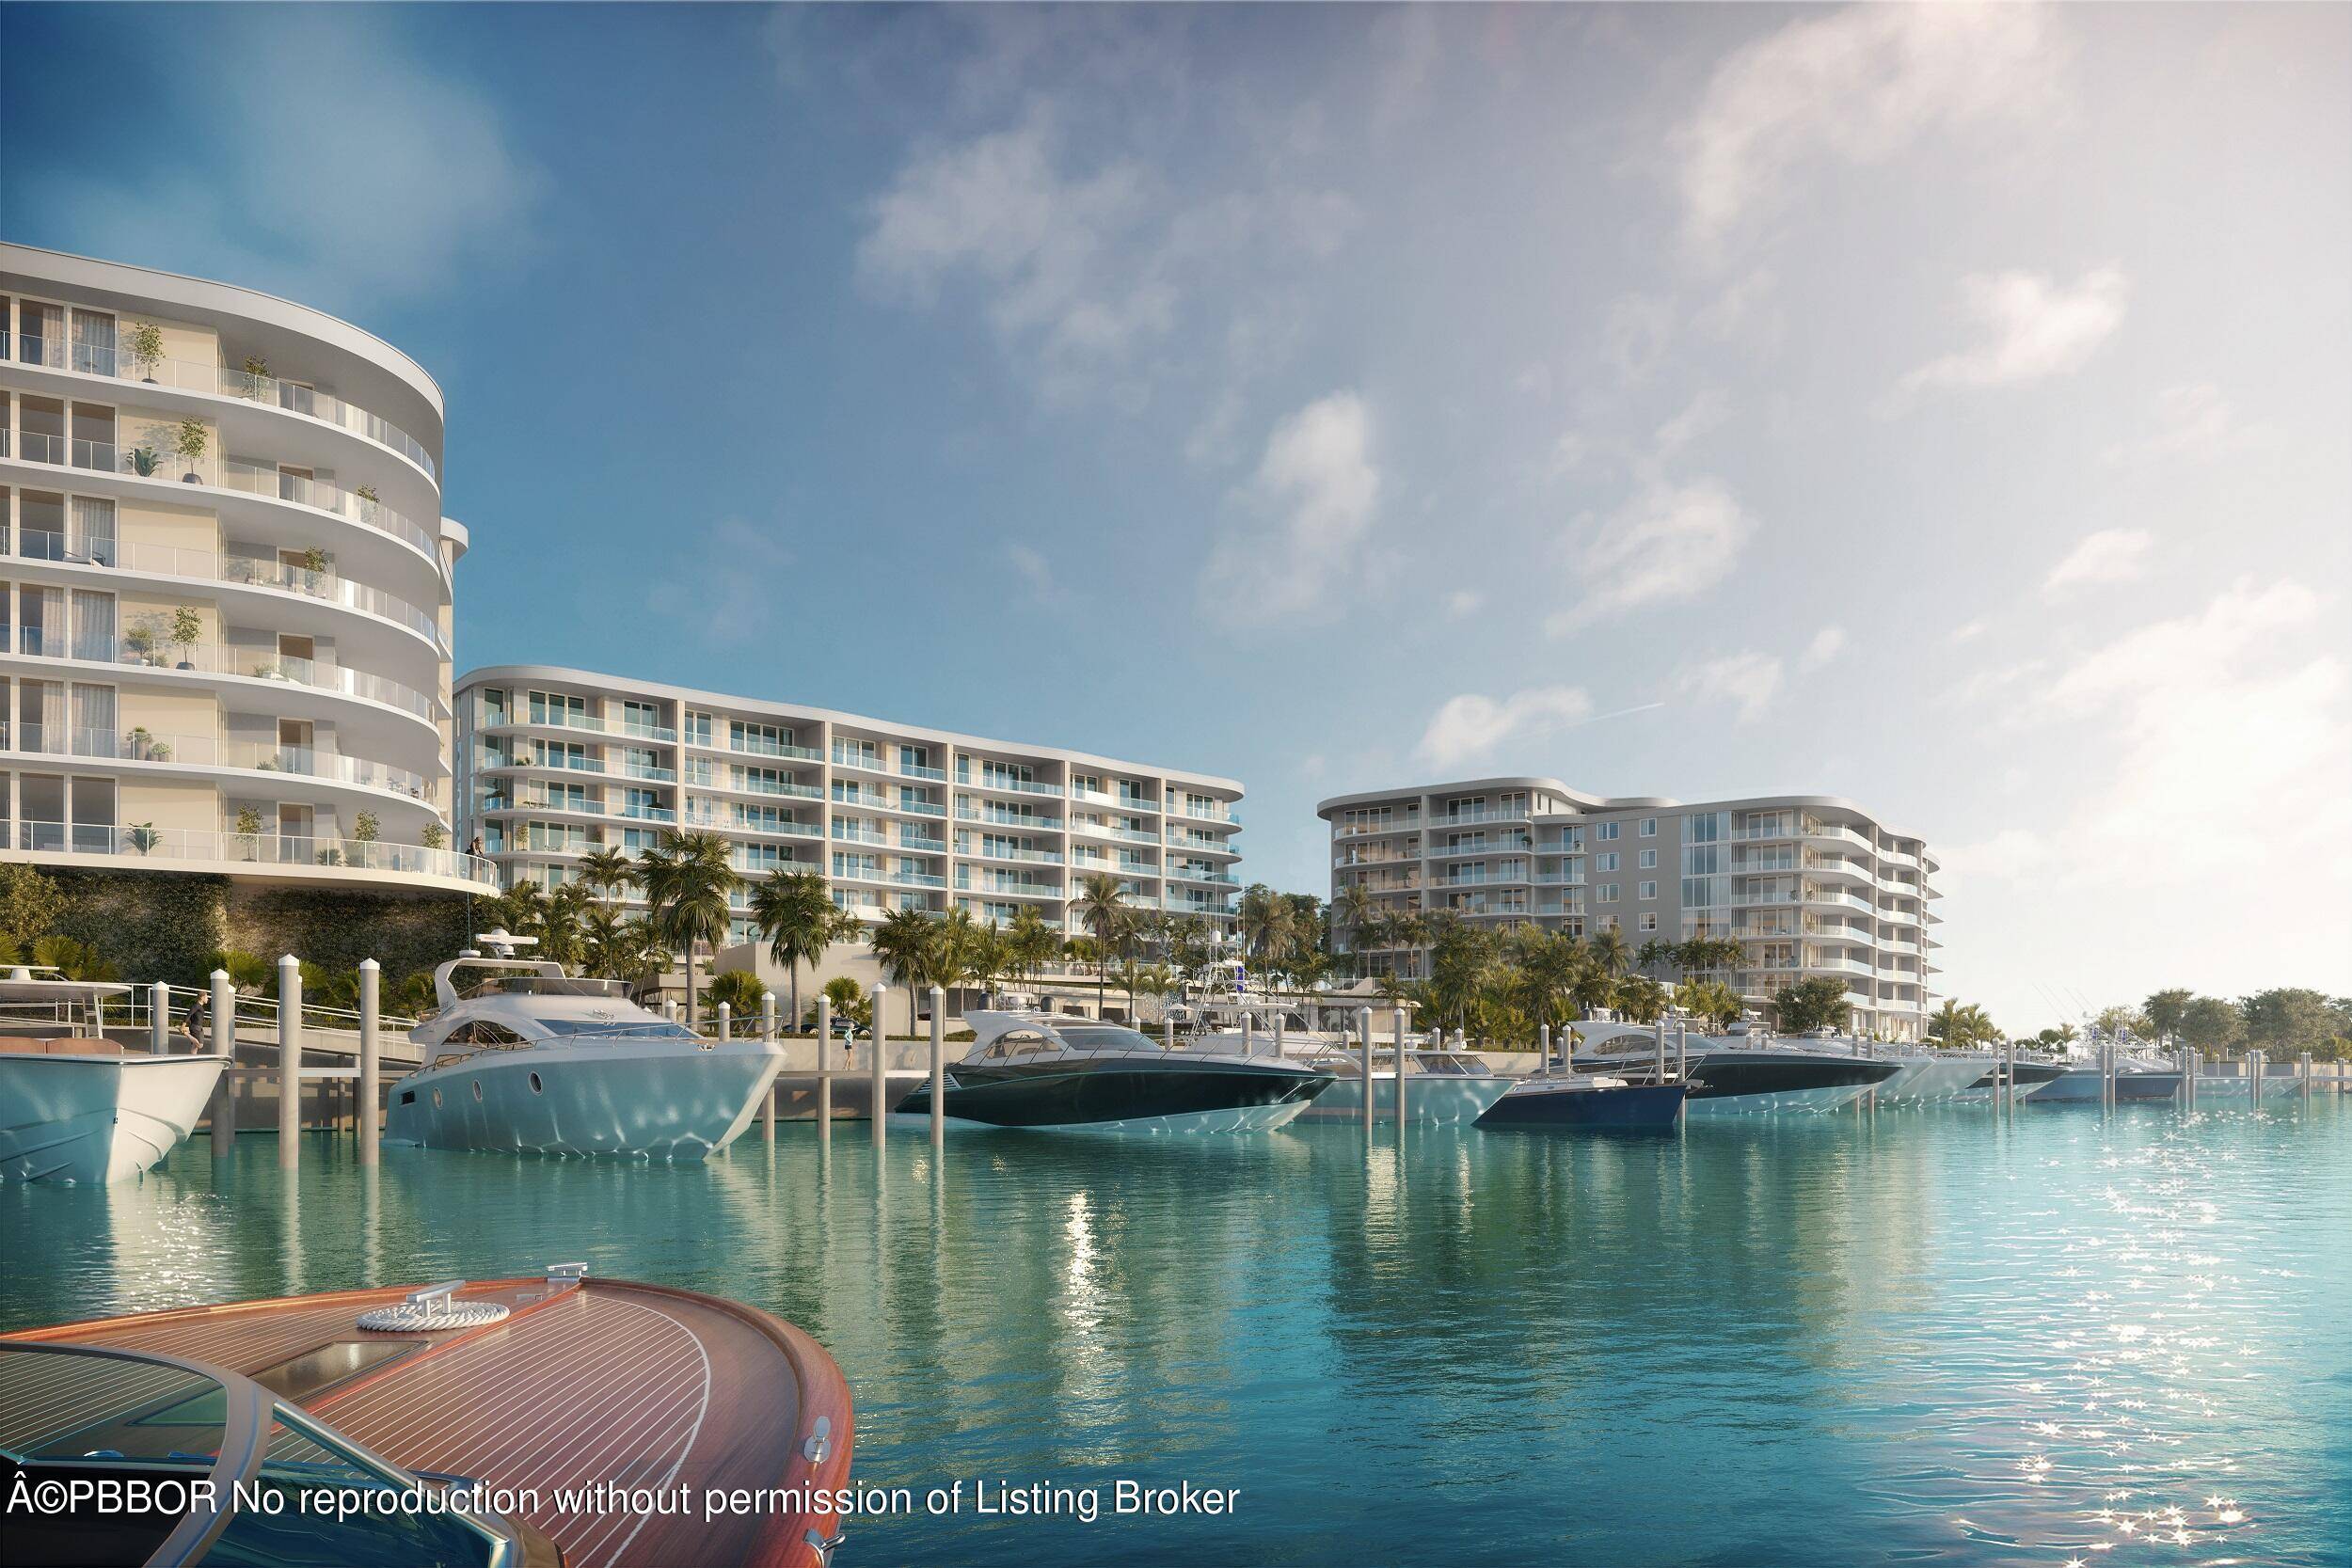 Embark on refined luxury at The Ritz Carlton Residences now under construction on a 14 acre, one of a kind property along the intracoastal waterway in the heart of Palm ...